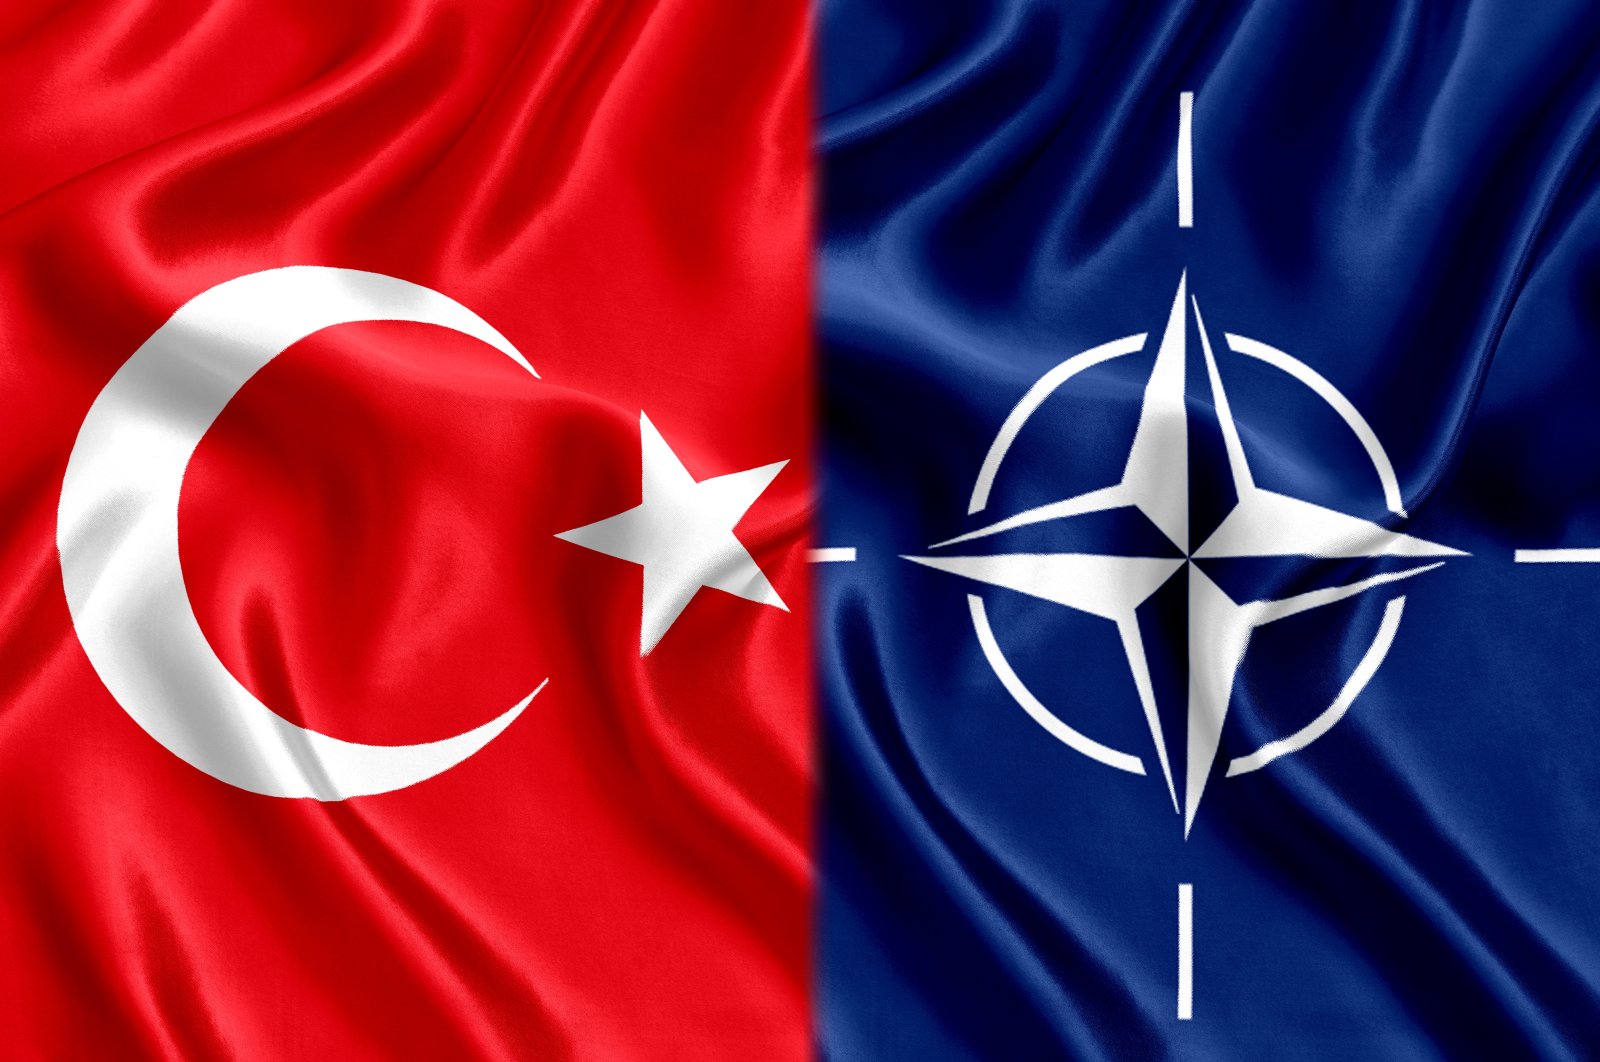 The flags of Turkey (L) and NATO are seen in this photo.(Shutterstock)